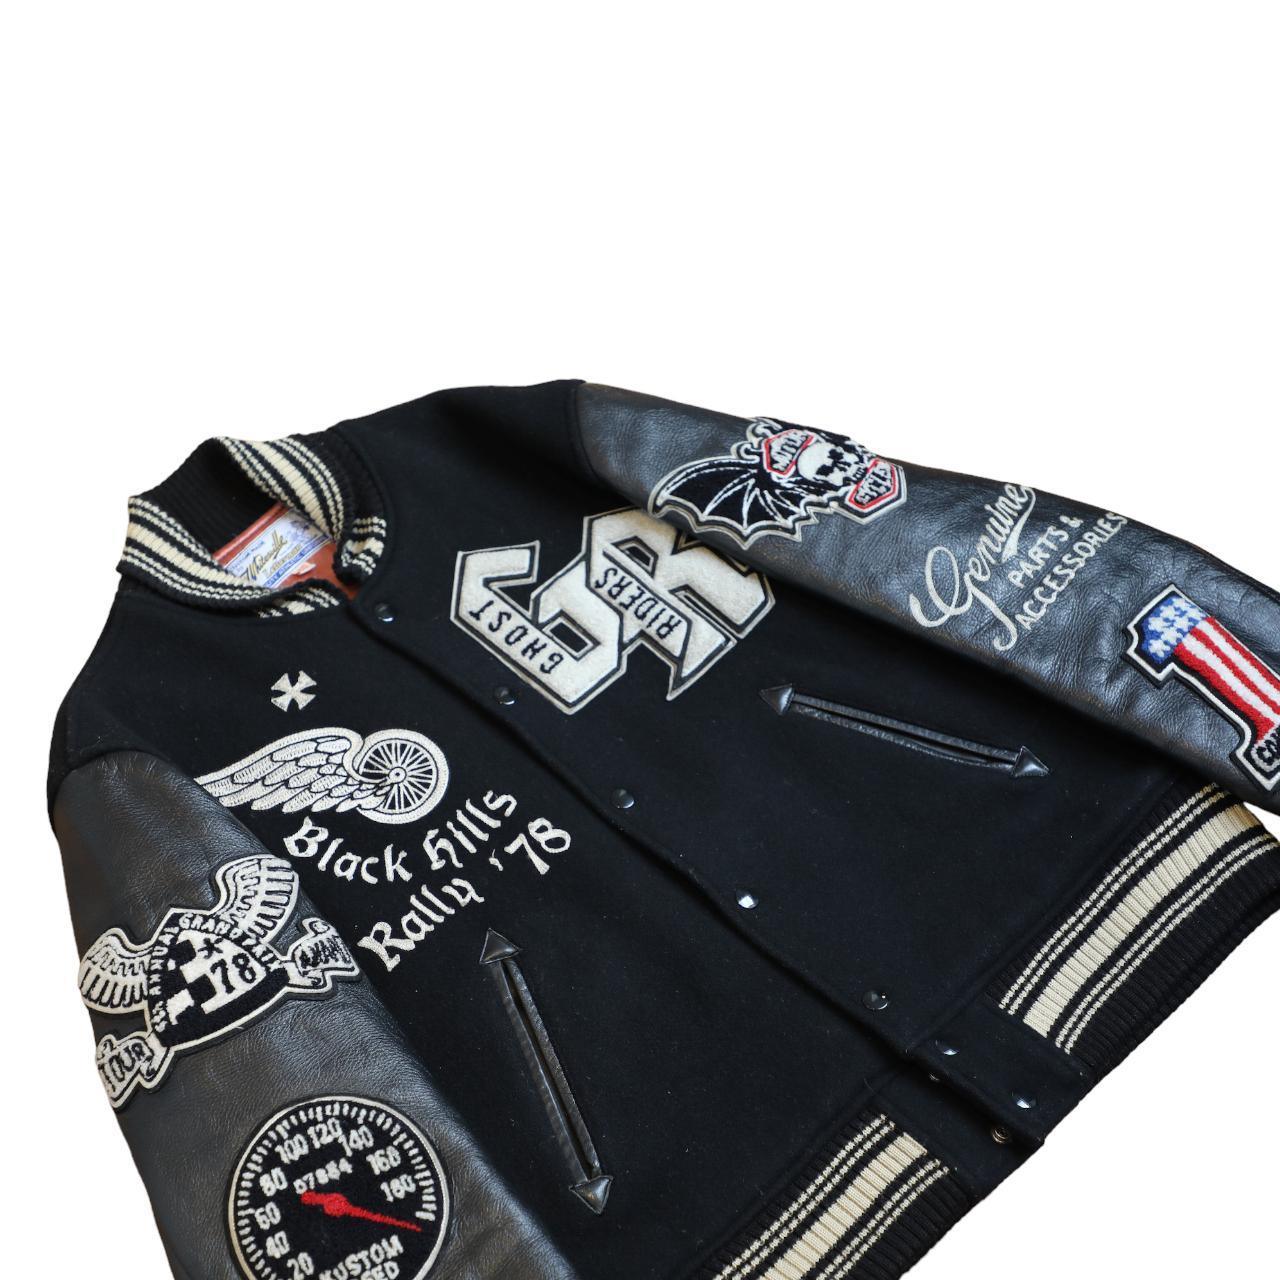 Whitesville 1978 Ghost Riders Motorcycle Club jacket Black/White - Known Source